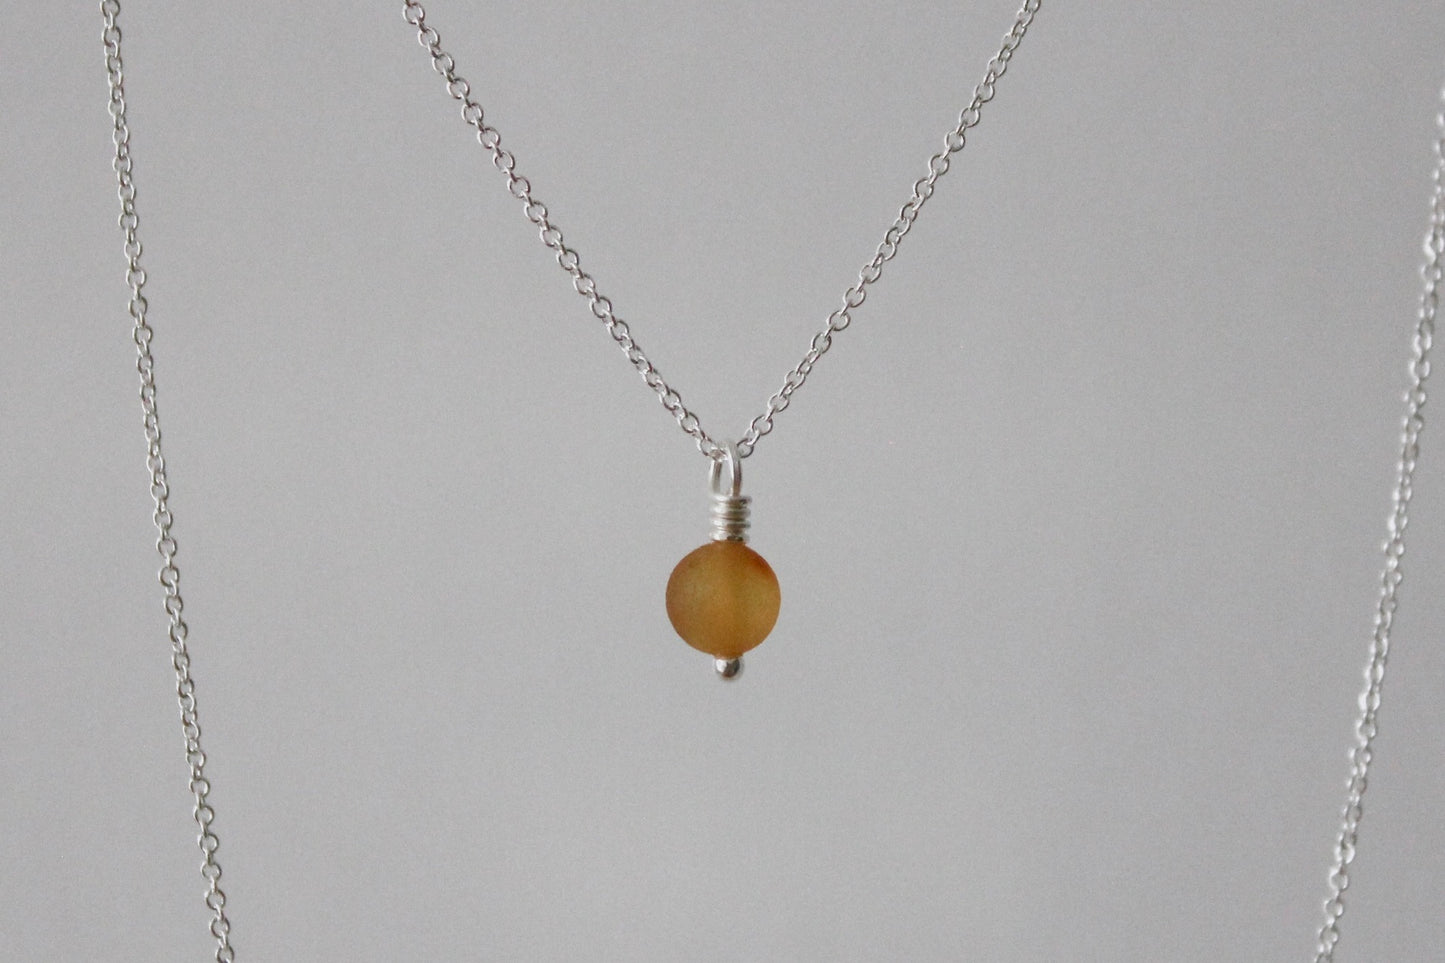 GOLD OF THE SEA necklace